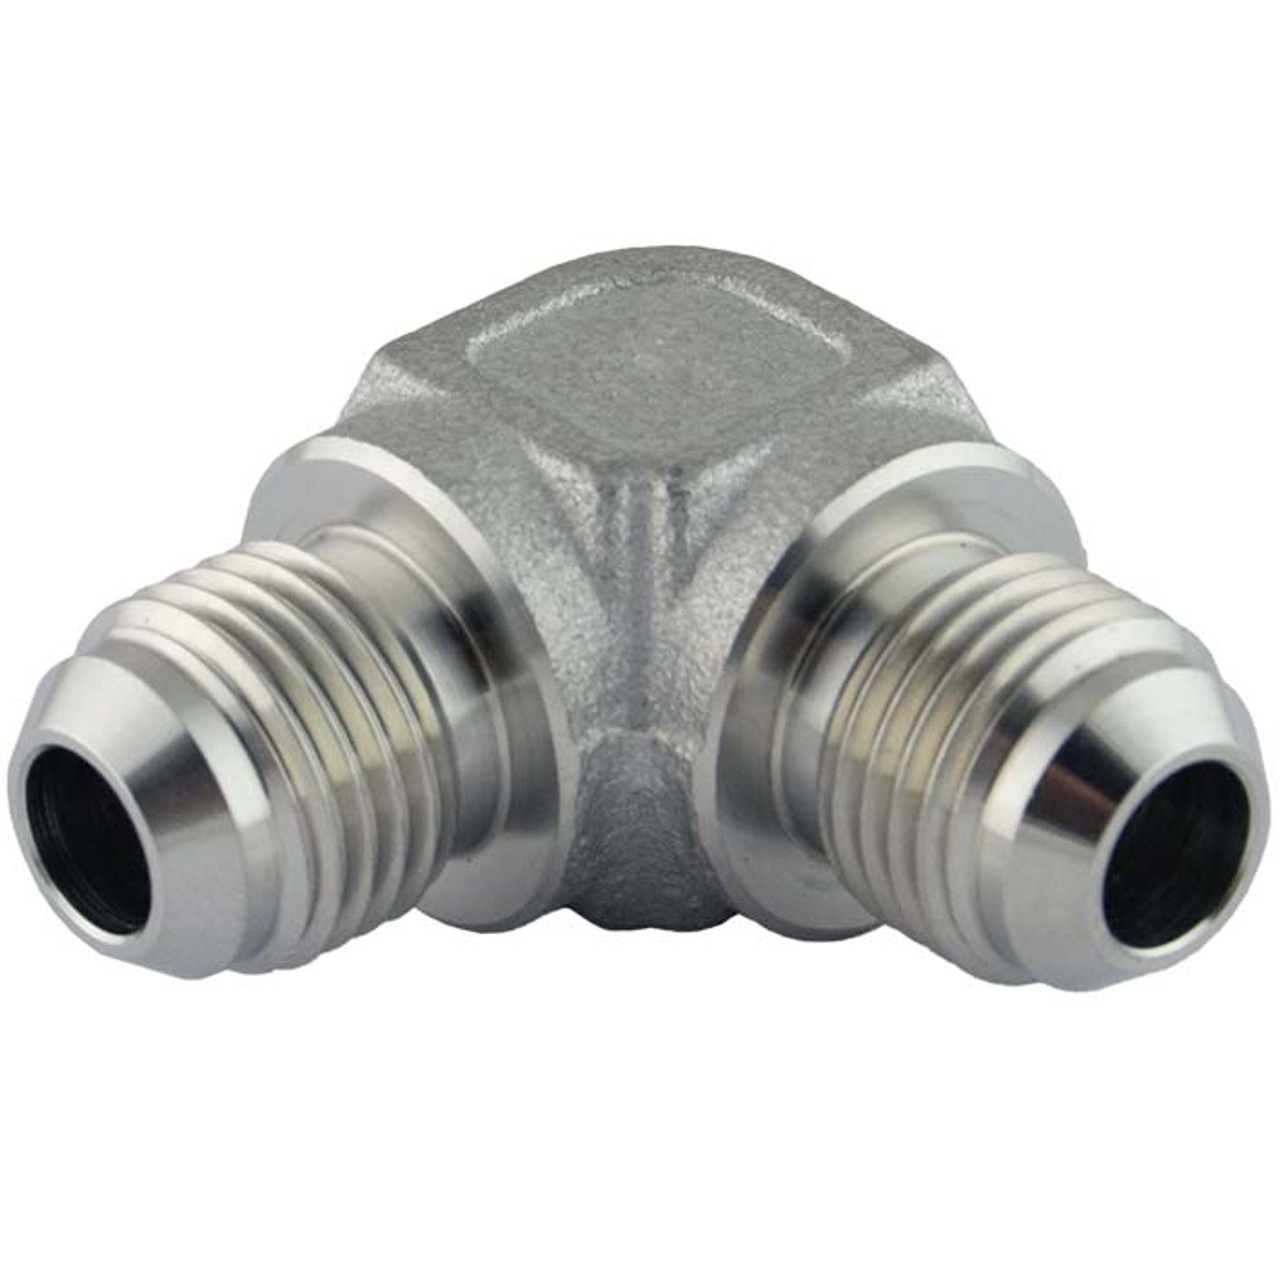 MJIC-2500 Male Union Elbow